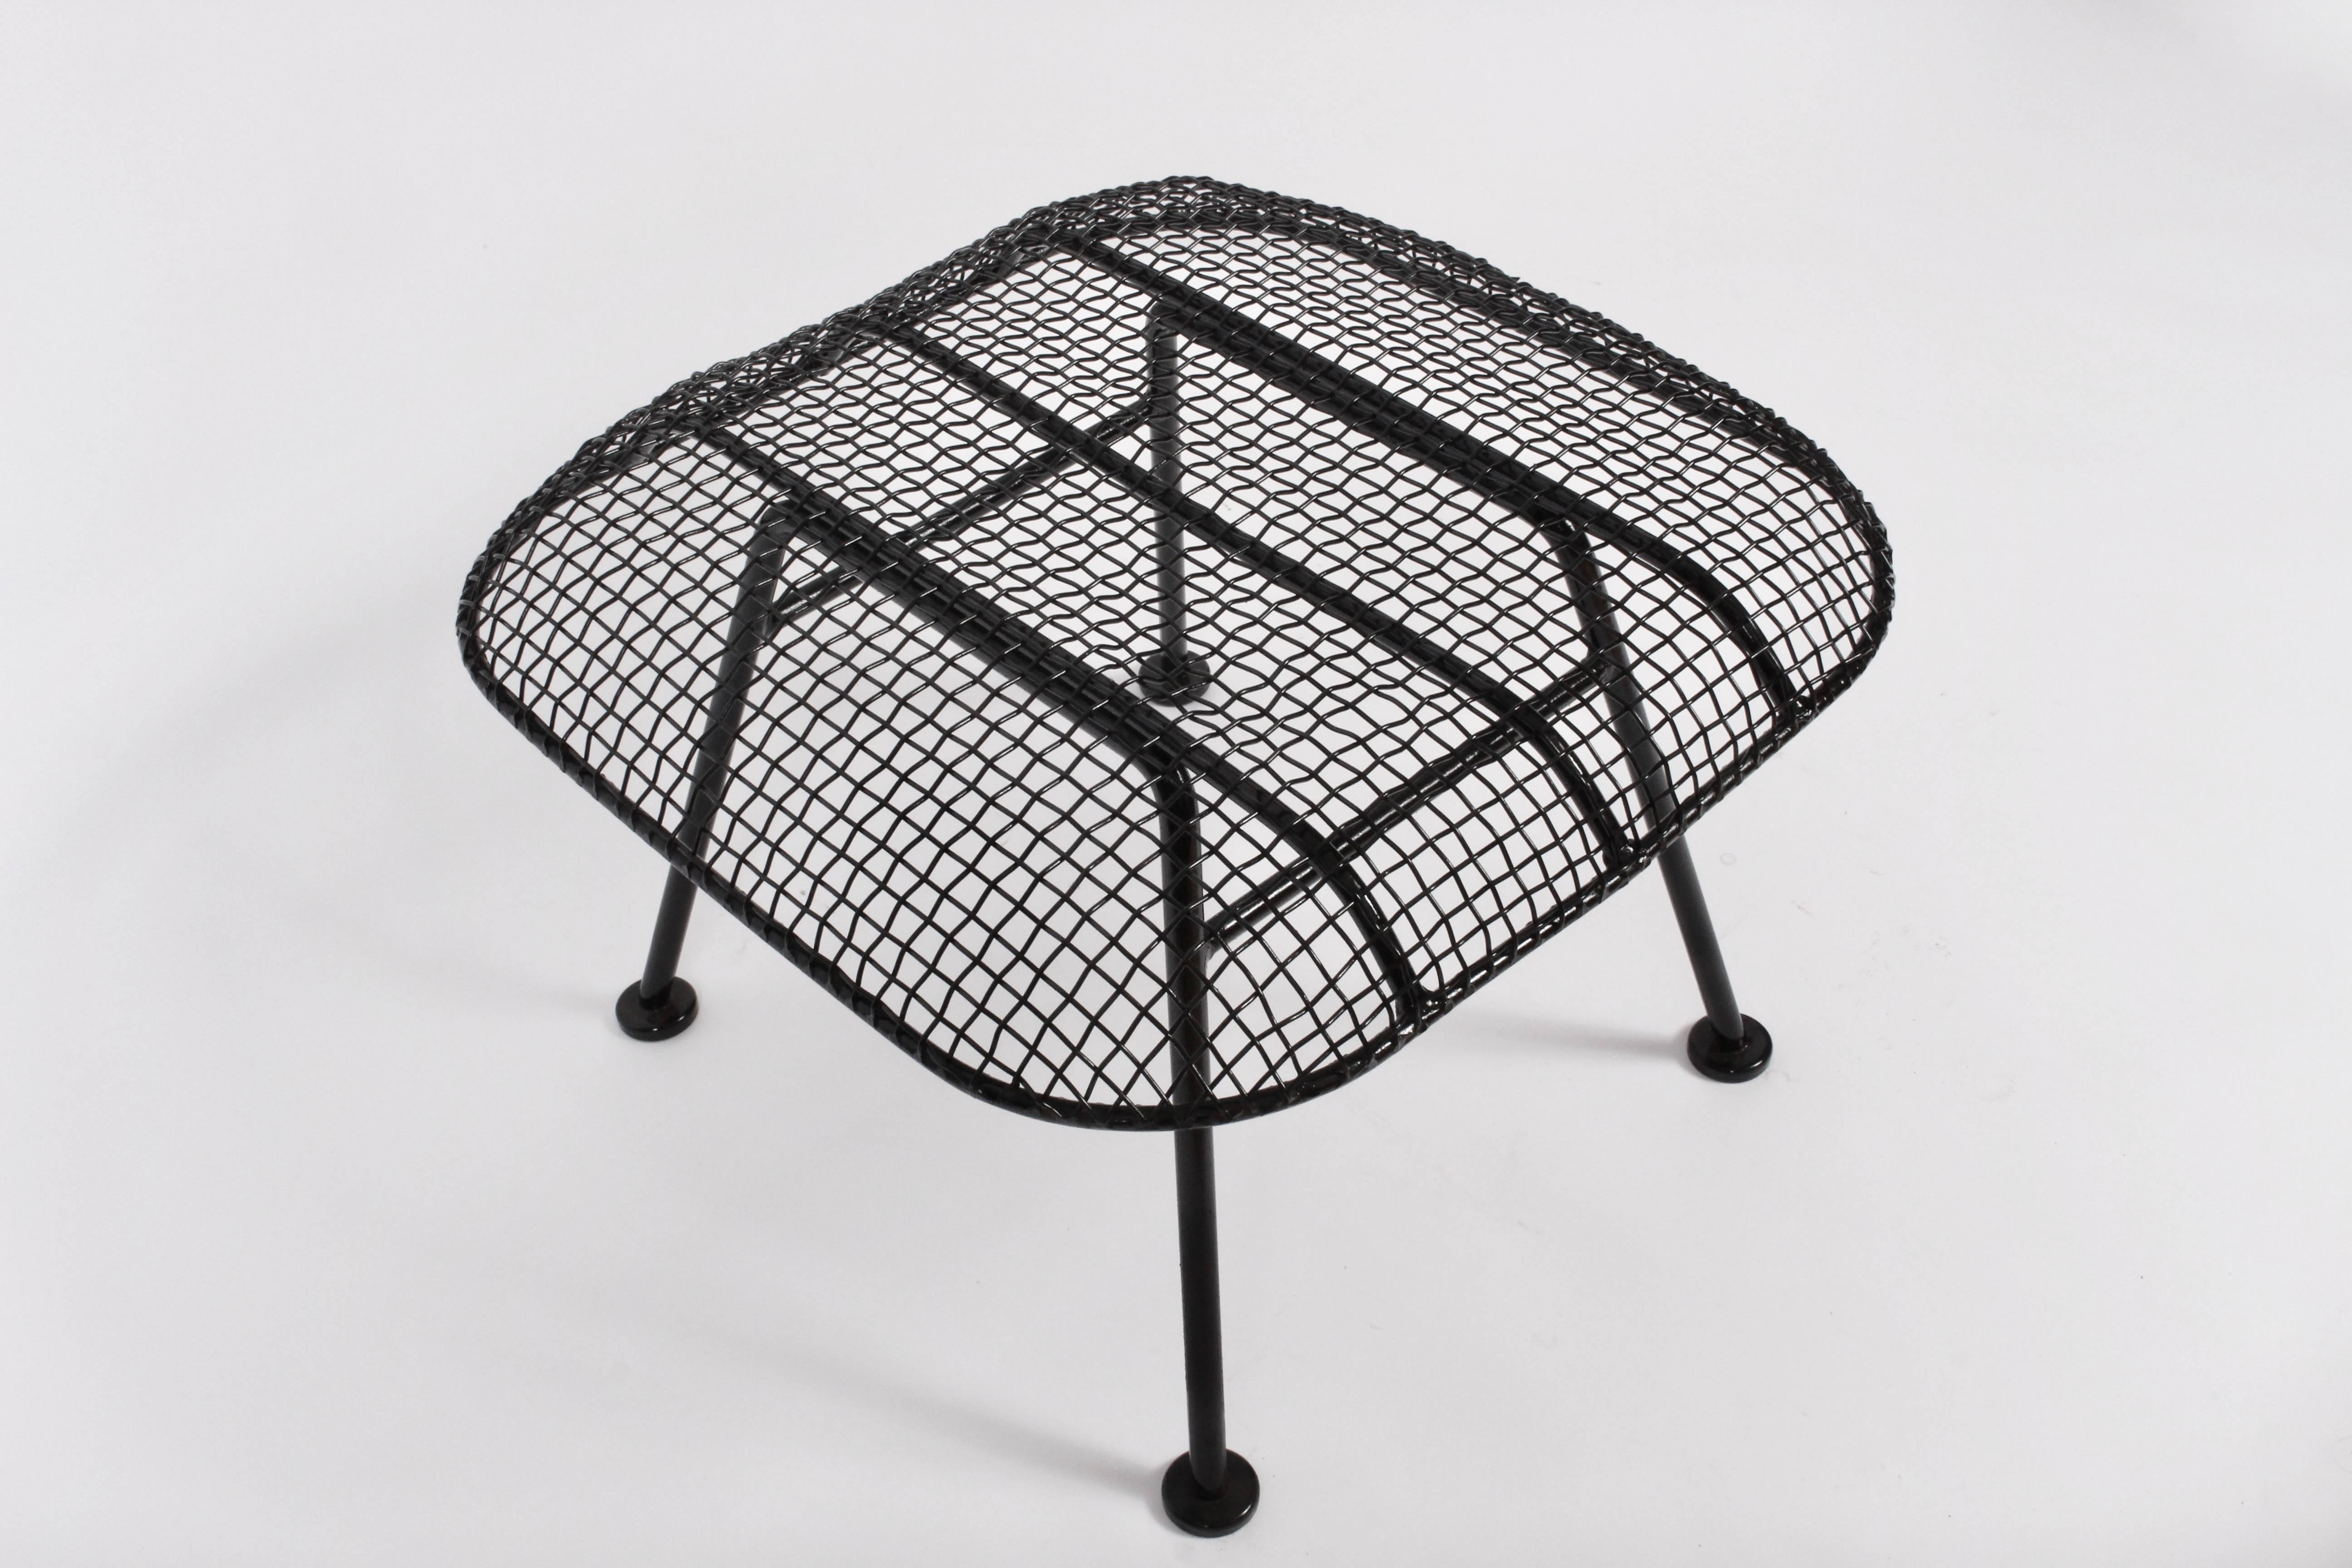 Larger American Mid Century Modern Russell Woodard Black Wrought Iron & Black Mesh Stool. Corner to corner measurements: 25W. Relaxed. Comfortable. Indoor Outdoor seating. Professionally sandblasted and painted in high gloss Black enamel paint. 